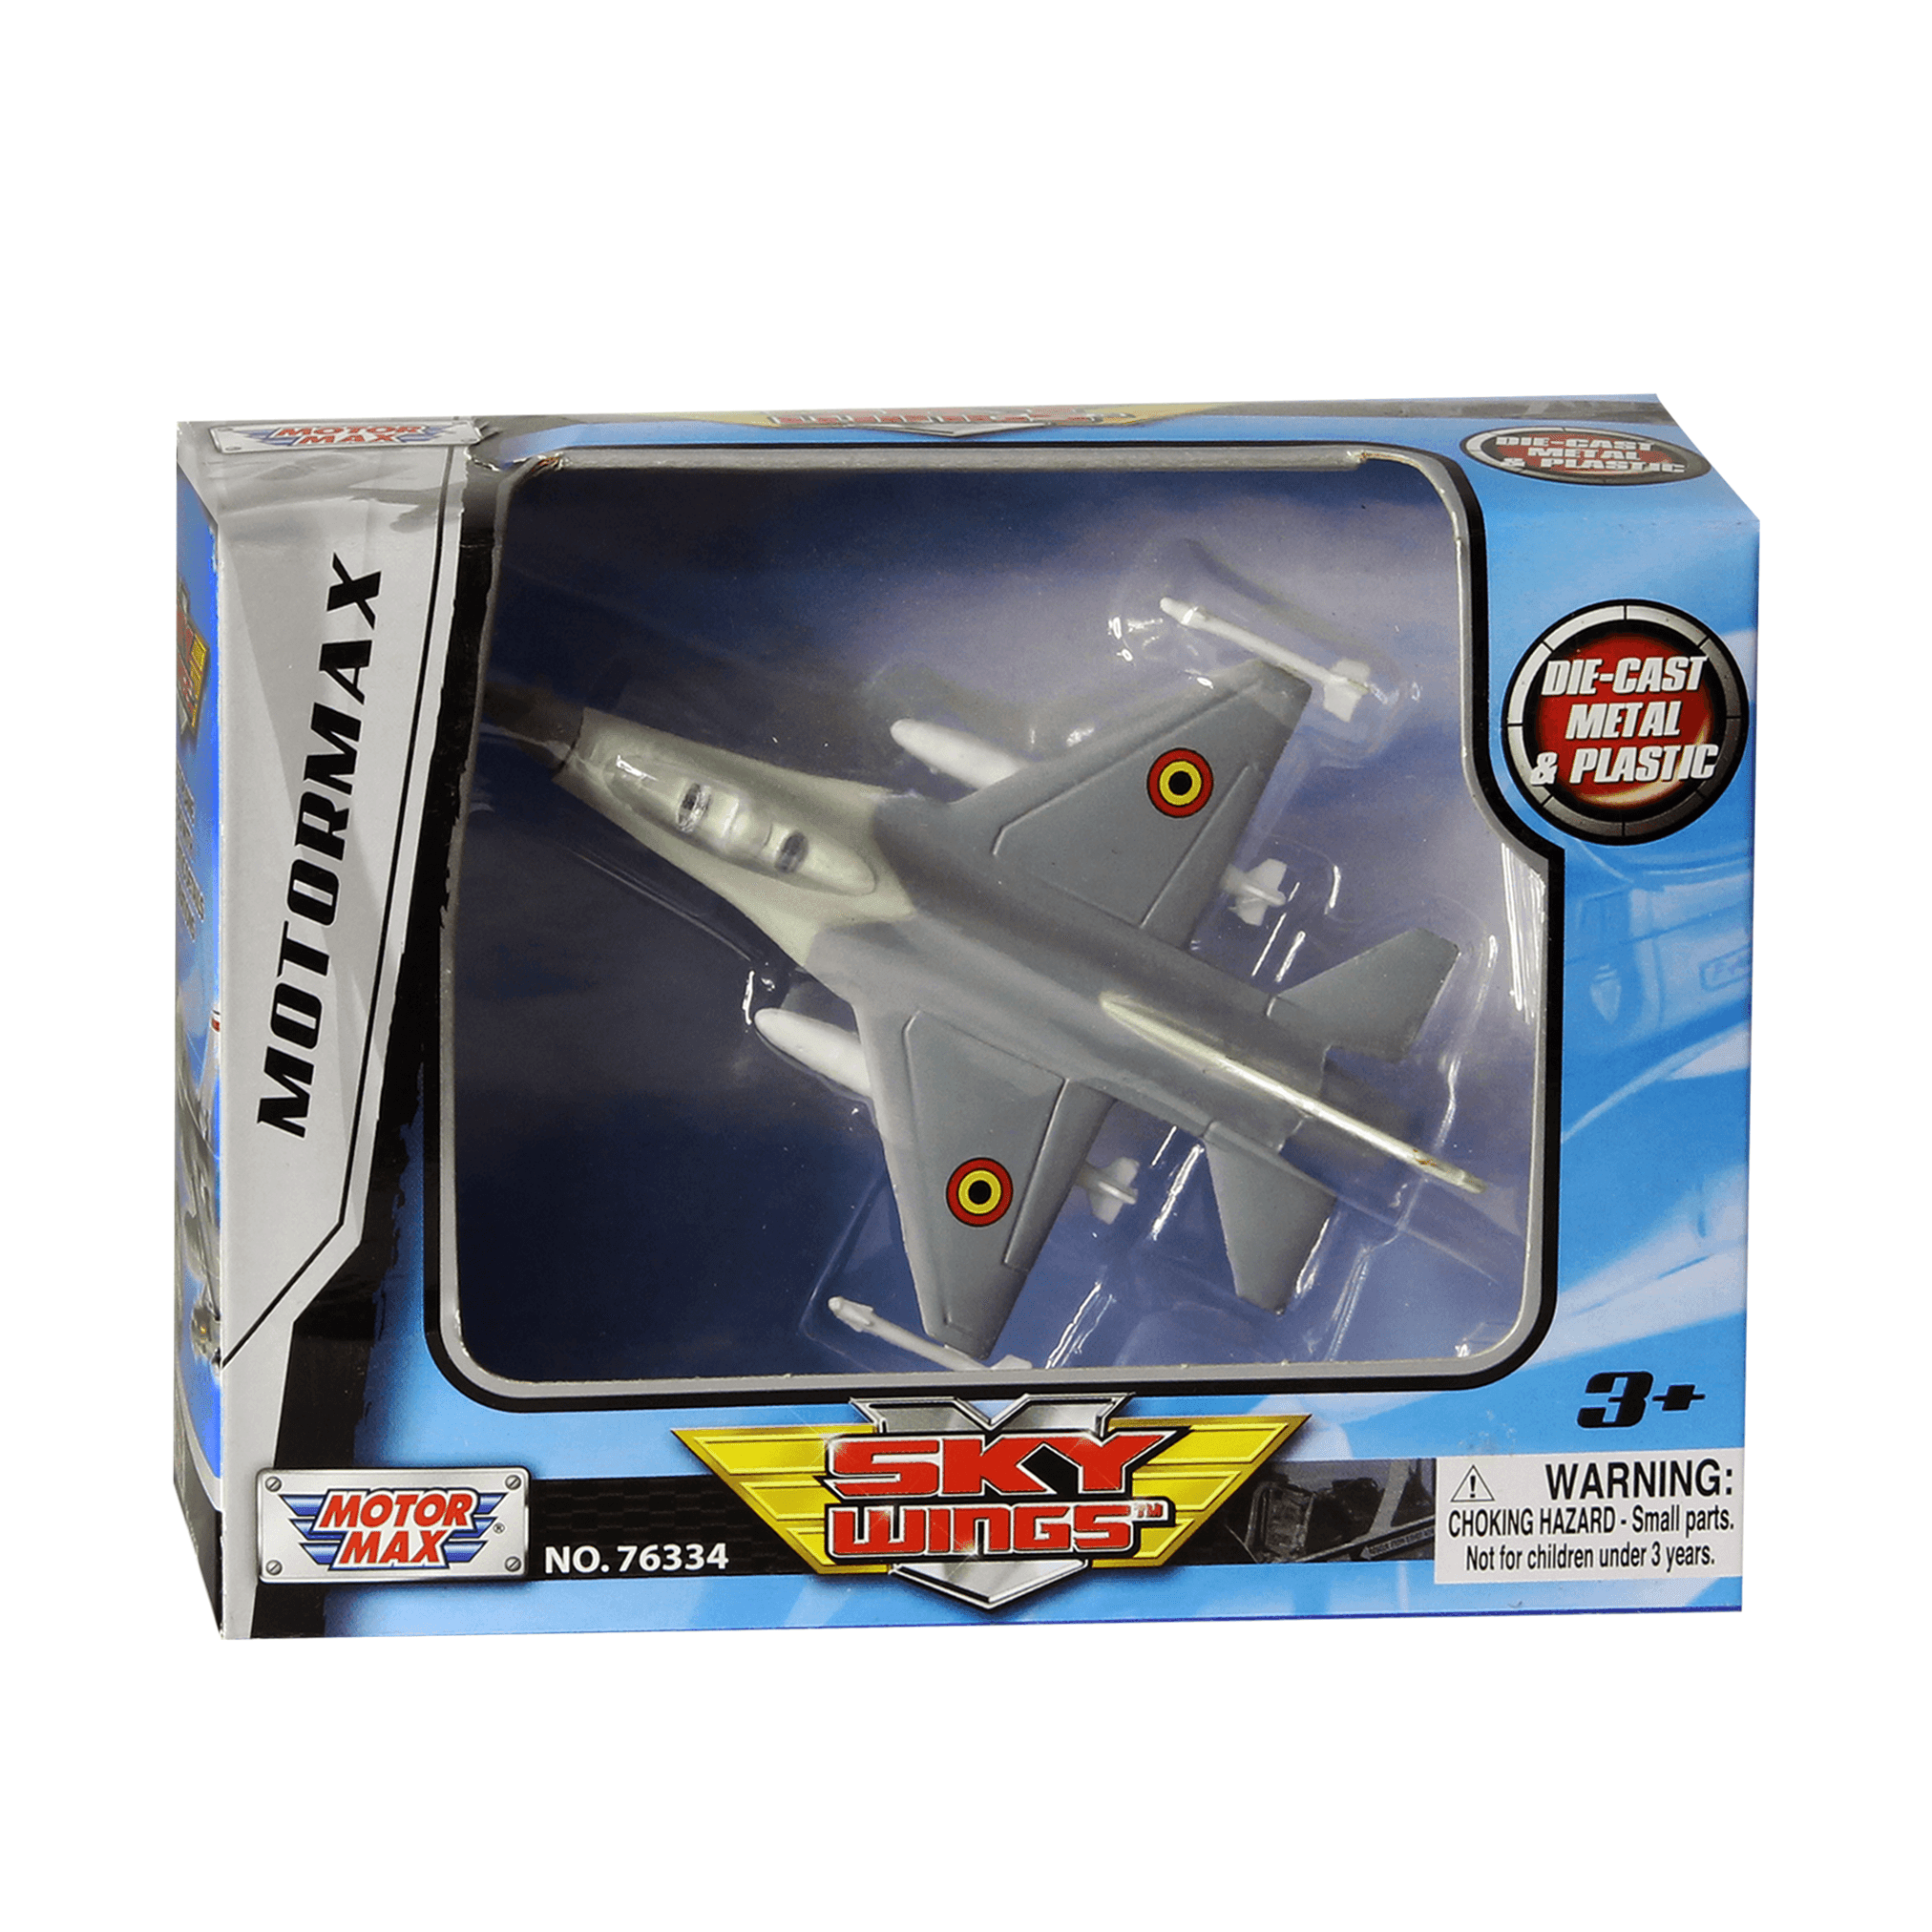 Motor Max 76334 Sky Wings Die Cast Metal And Plastic Plane ( Style May Varey) - BumbleToys - 5-7 Years, Boys, Cecil, Collectible Vehicles